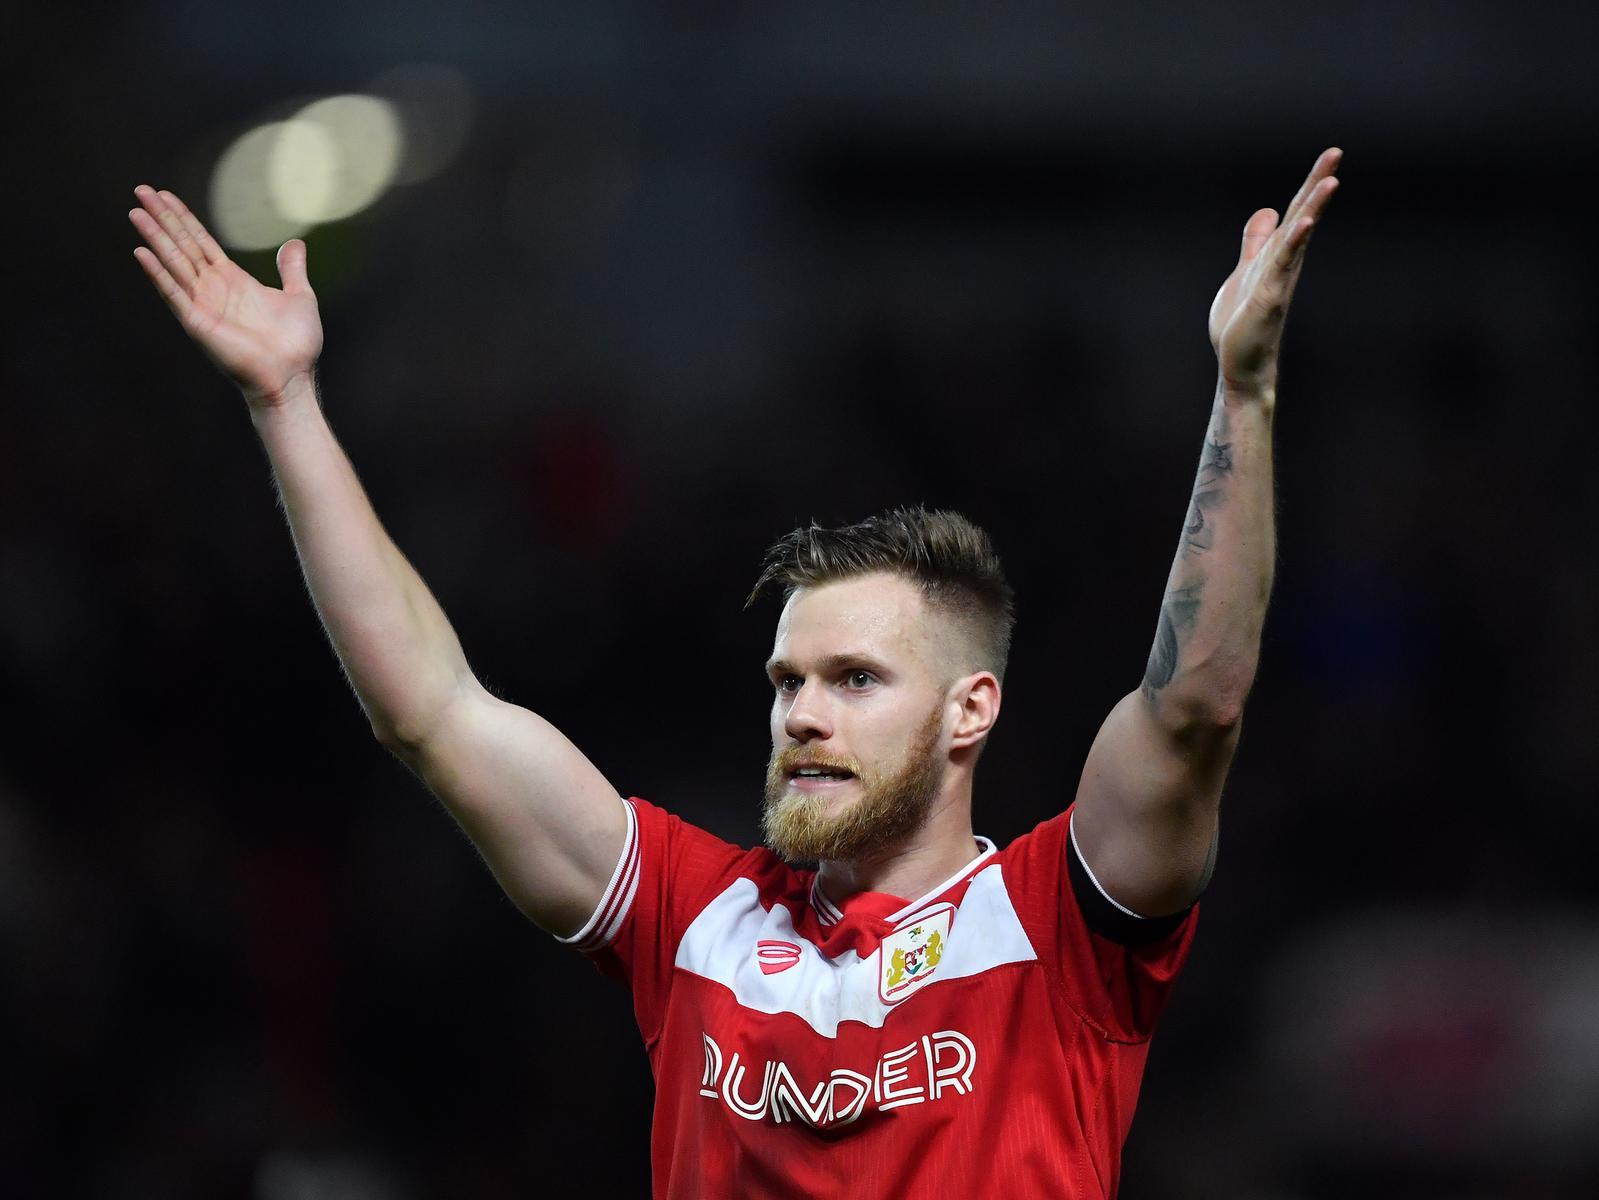 Bristol City manager Lee Johnson has revealed he's unsure when star defender Tomas Kalas will return from injury, suggesting he could be out for as long as three weeks. (Bristol Post)